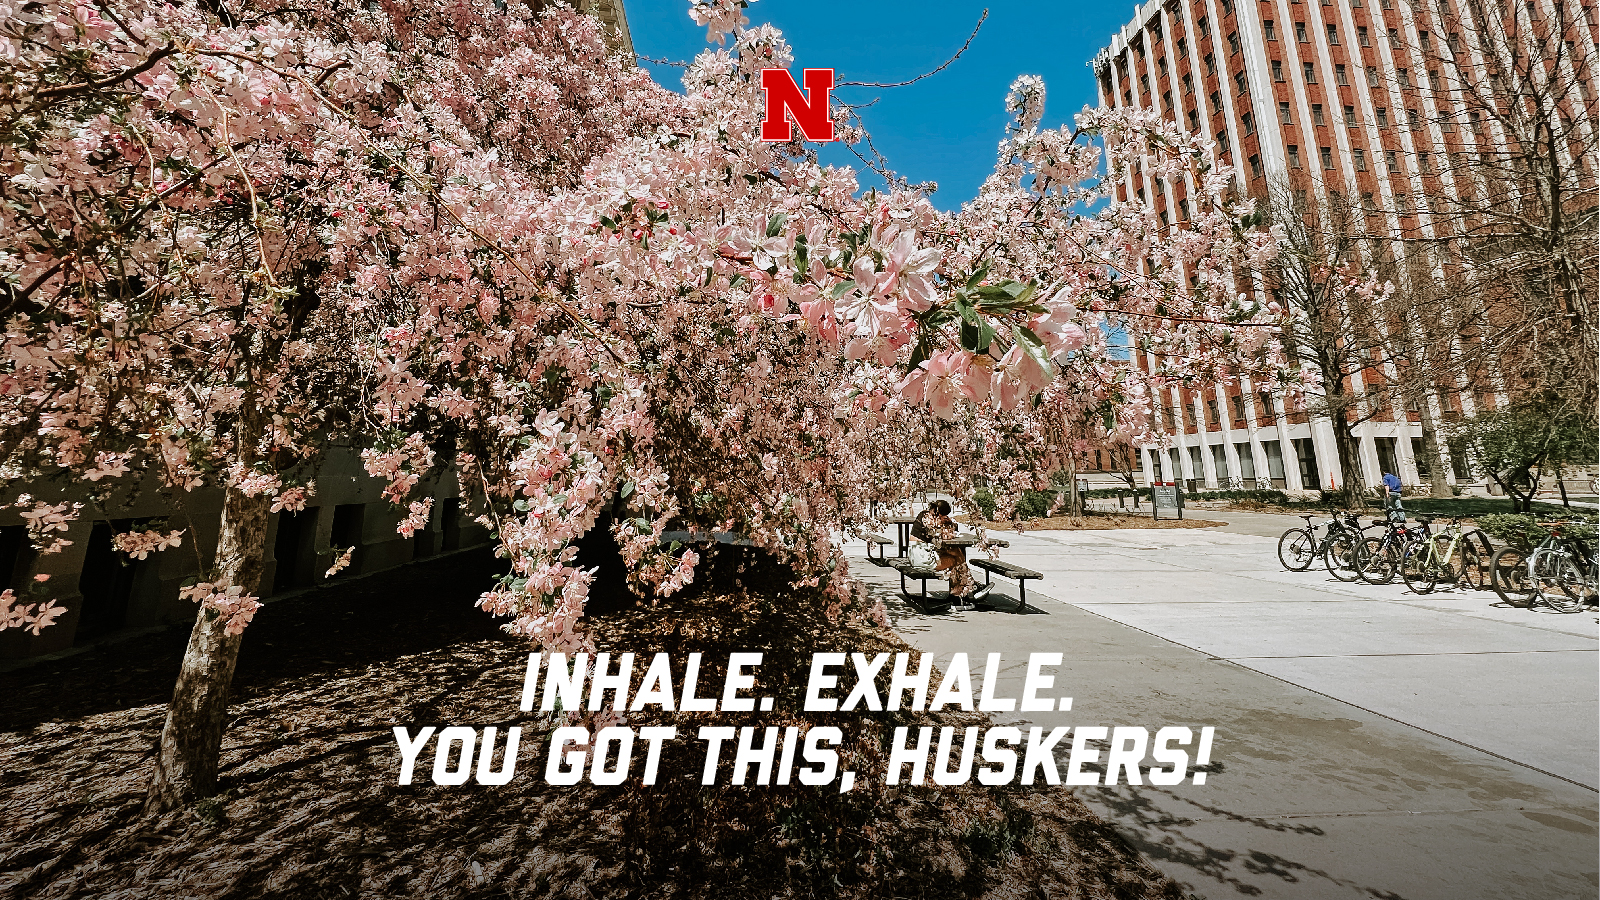 Finish Strong, Huskers!